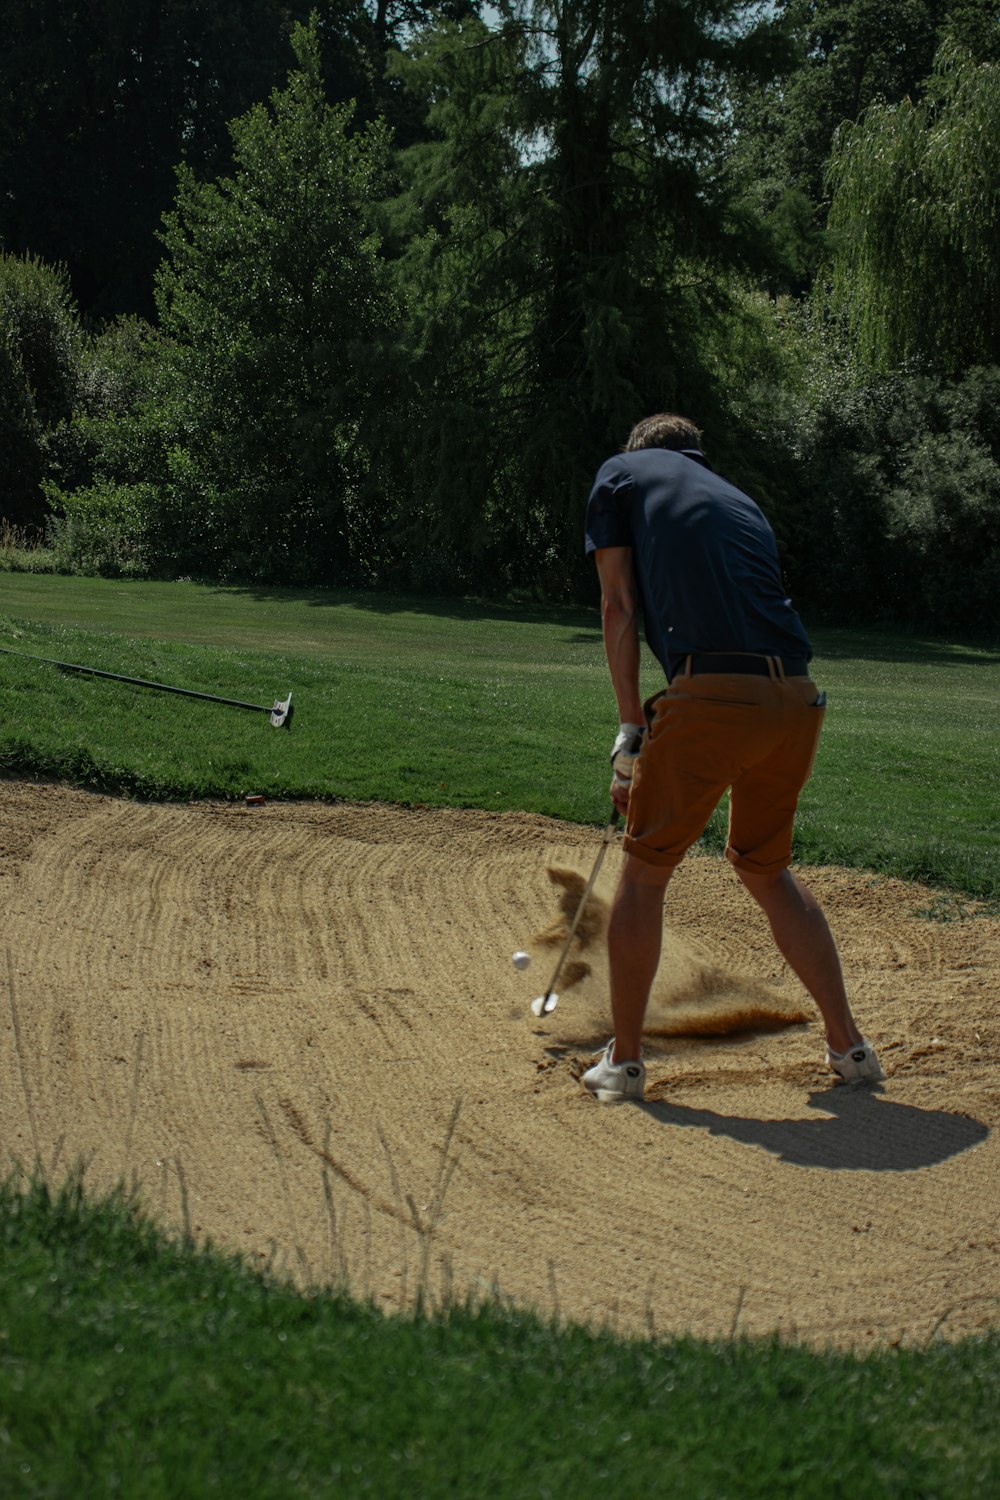 a man is playing golf on a dirt course